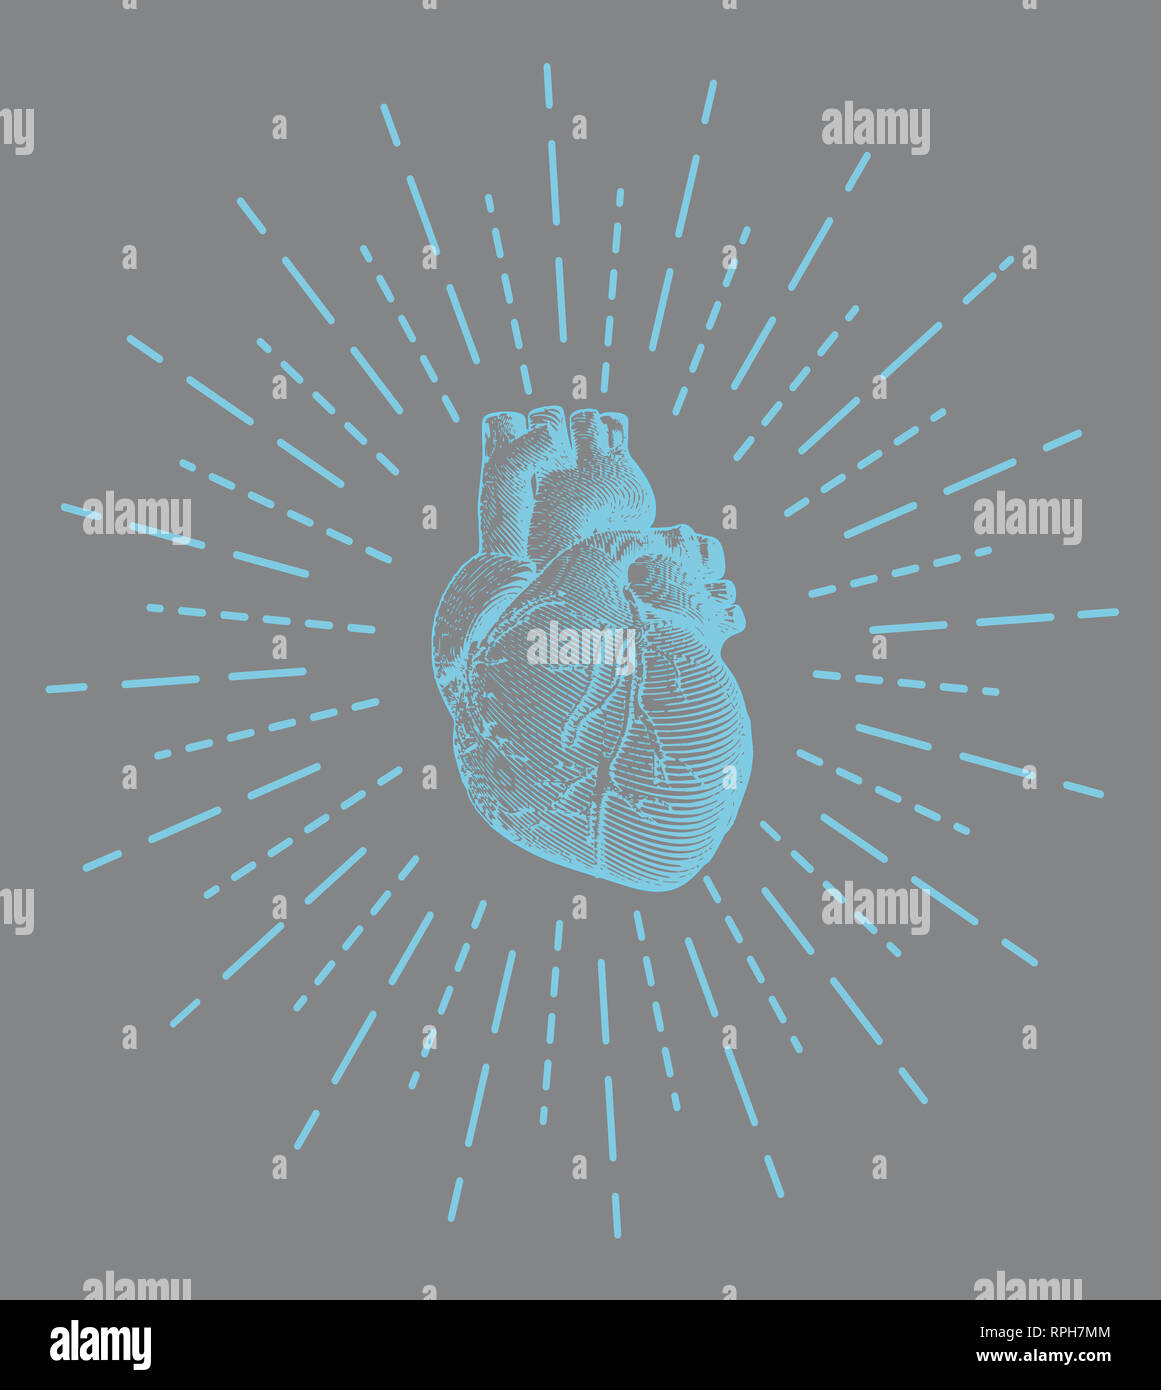 Blue engraving human heart illustration on gray background with shining star burst stroke drawing Stock Photo